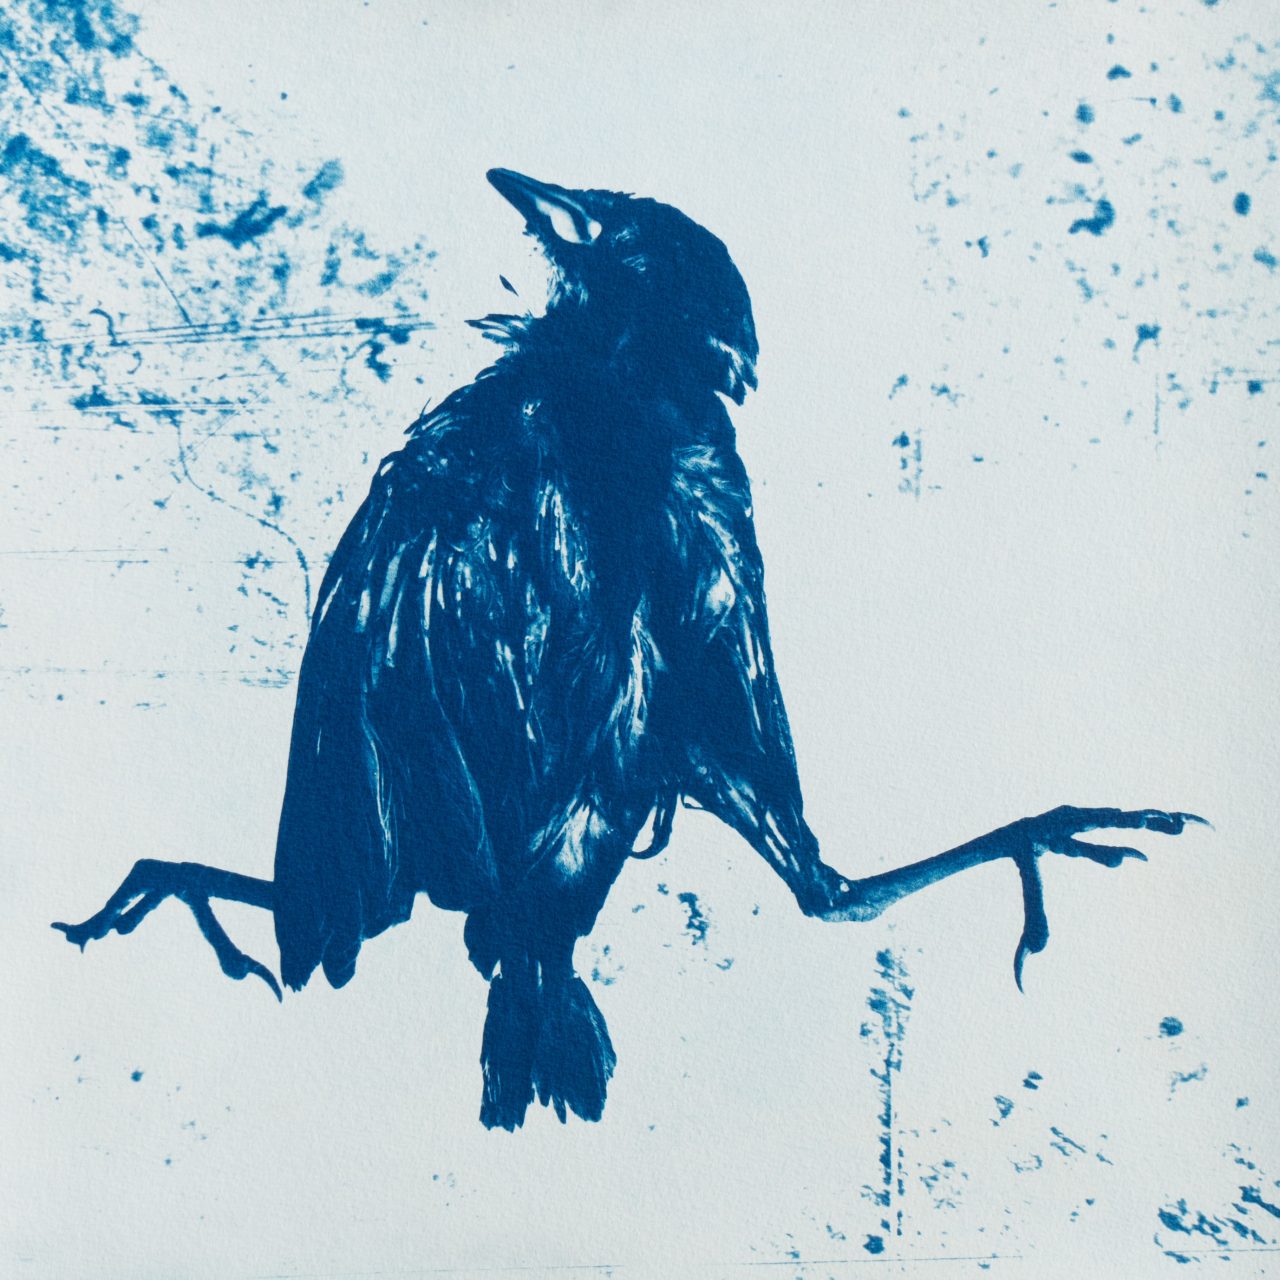 Change
A dead bird marks a new beginning and symbolizes a metaphorical death as opposed to a physical death.

Cyanotype blue 40 x 40 cm